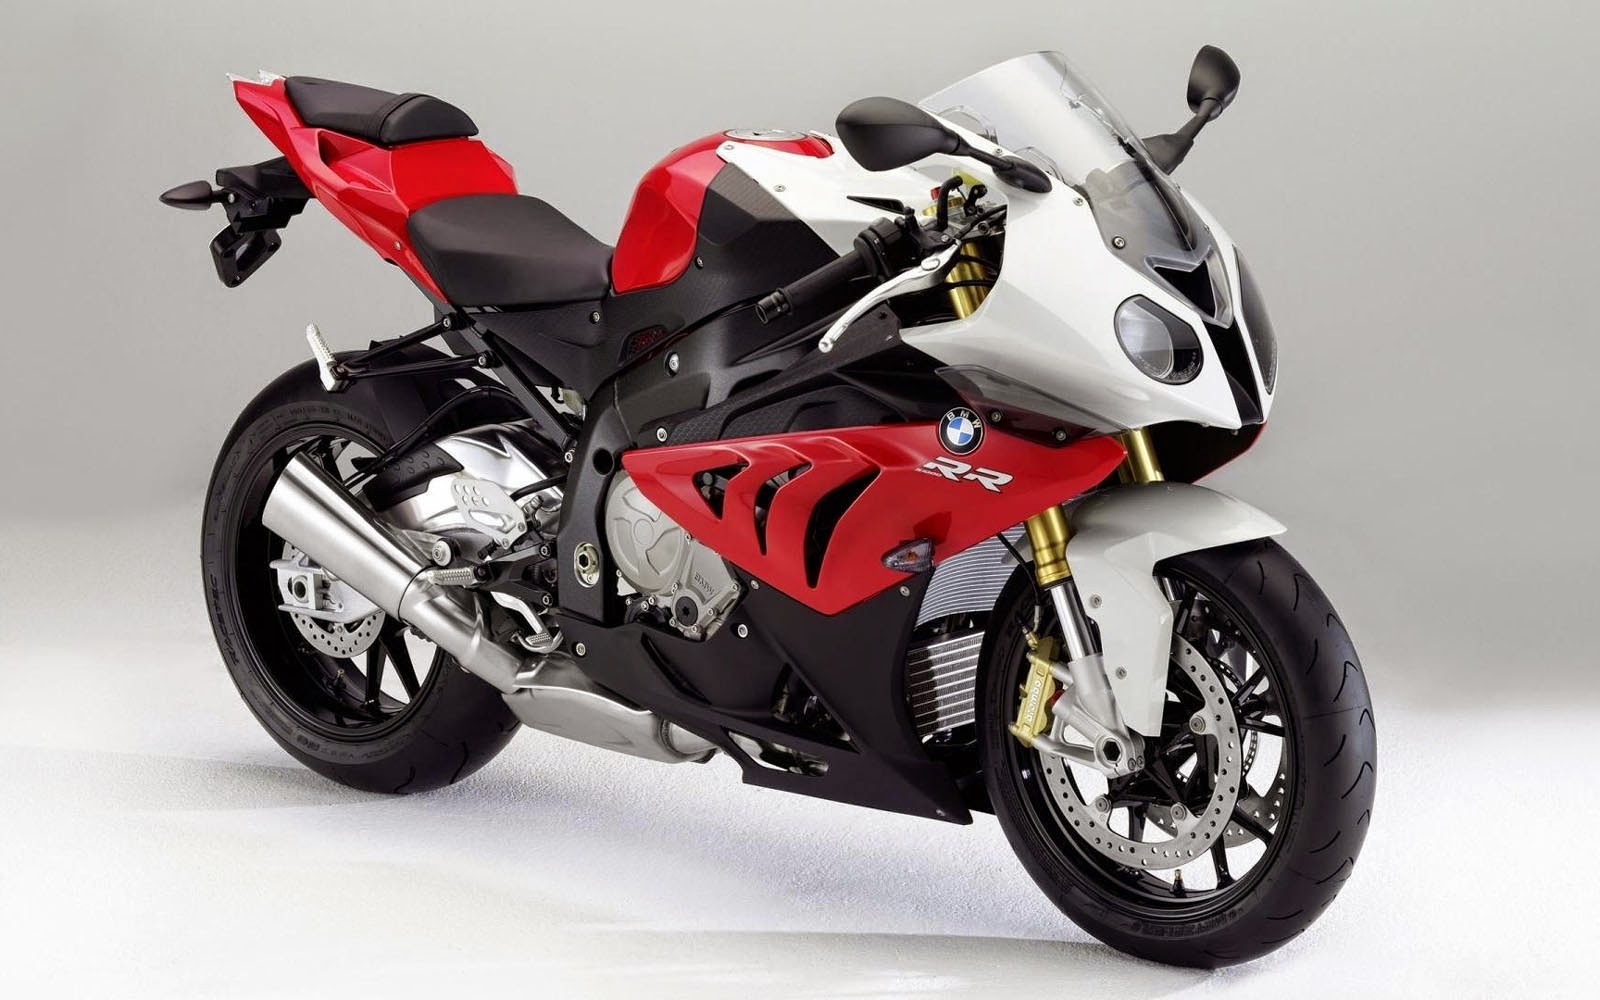 BMW S1000RR Superbike 35 HD Wallpapers All Latest New Old Car